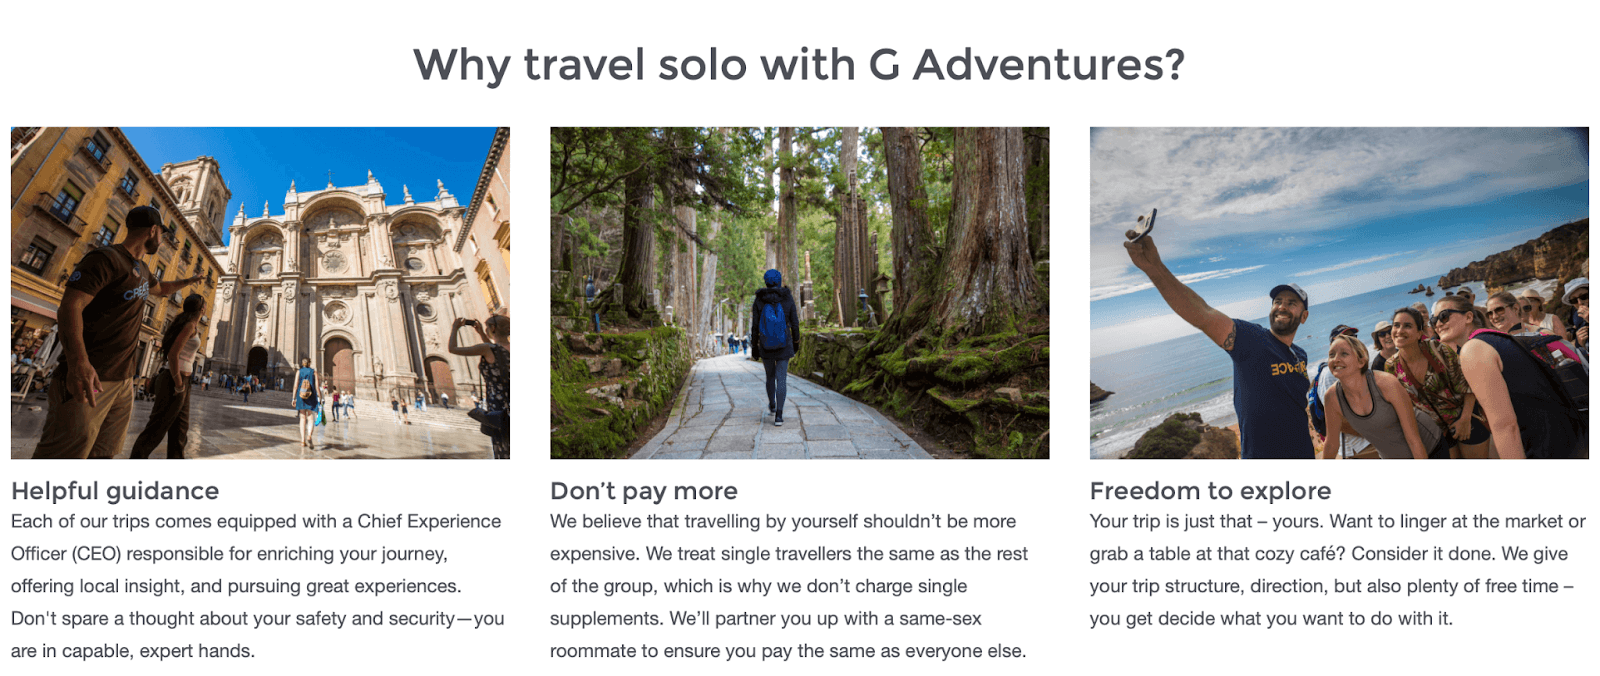 How Tour Companies Can Effectively Target Solo Travelers Image 10